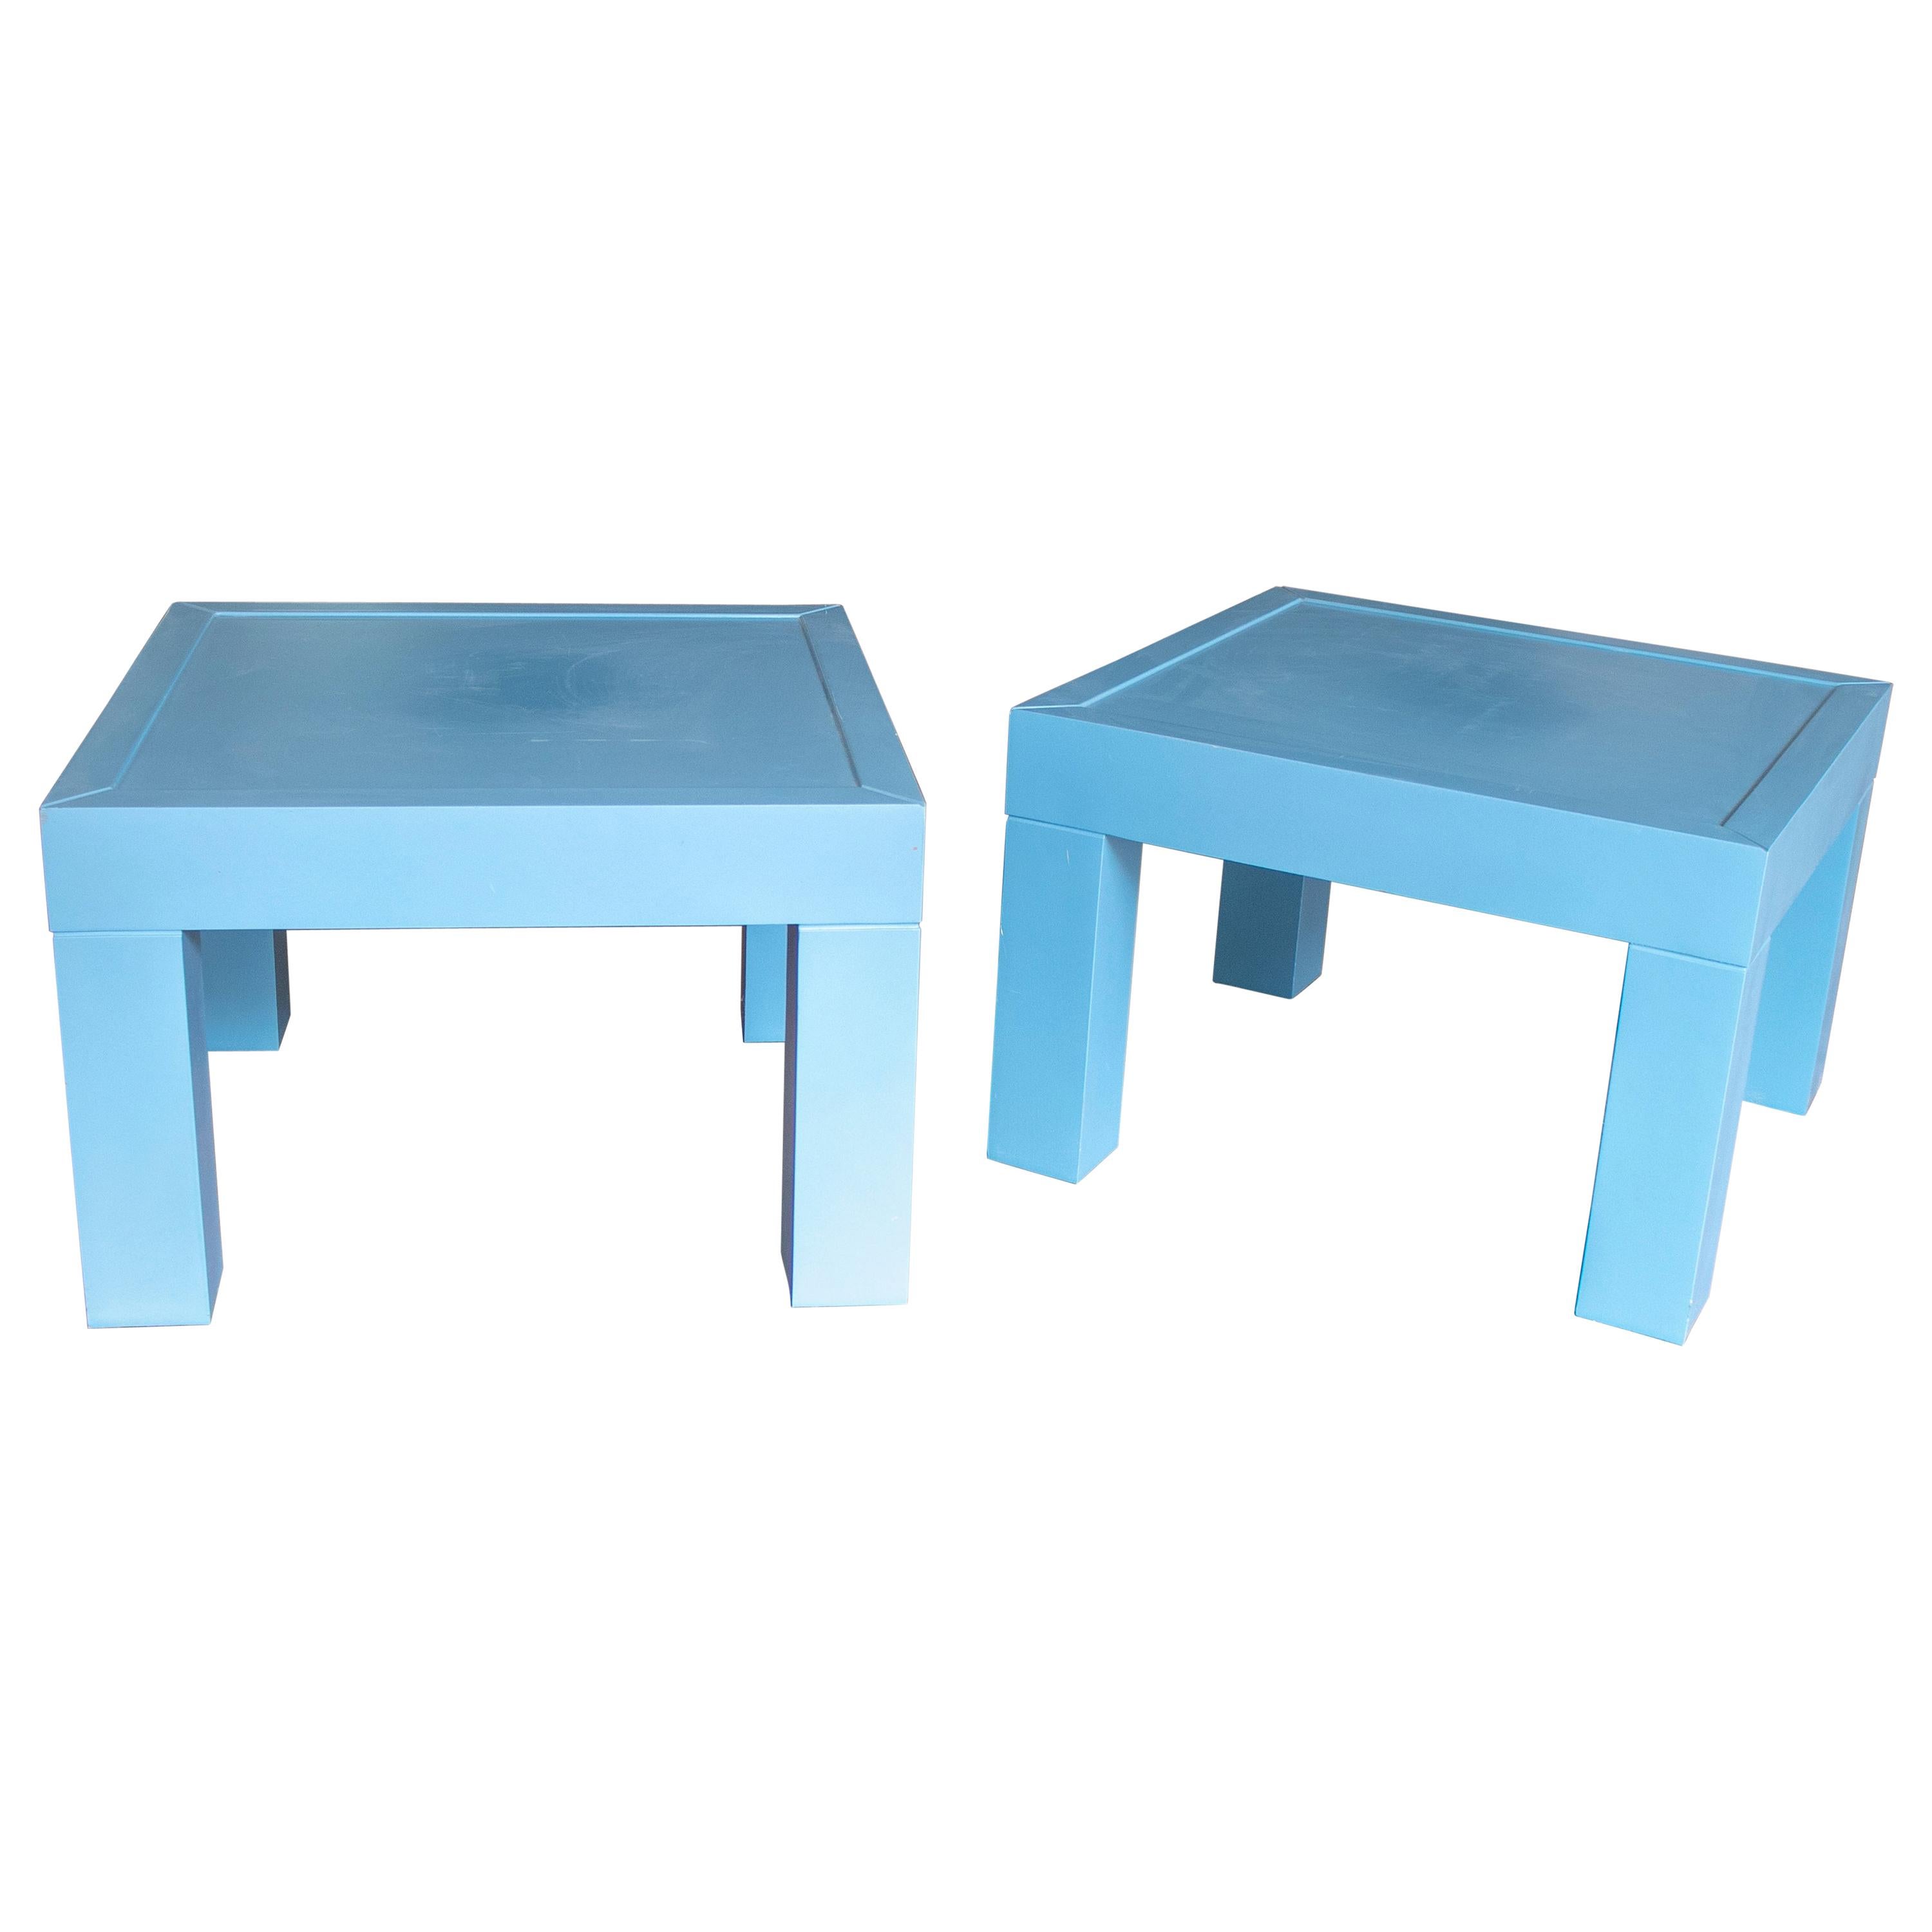 1980s Pair of Spanish Lacquered Wooden Side Tables